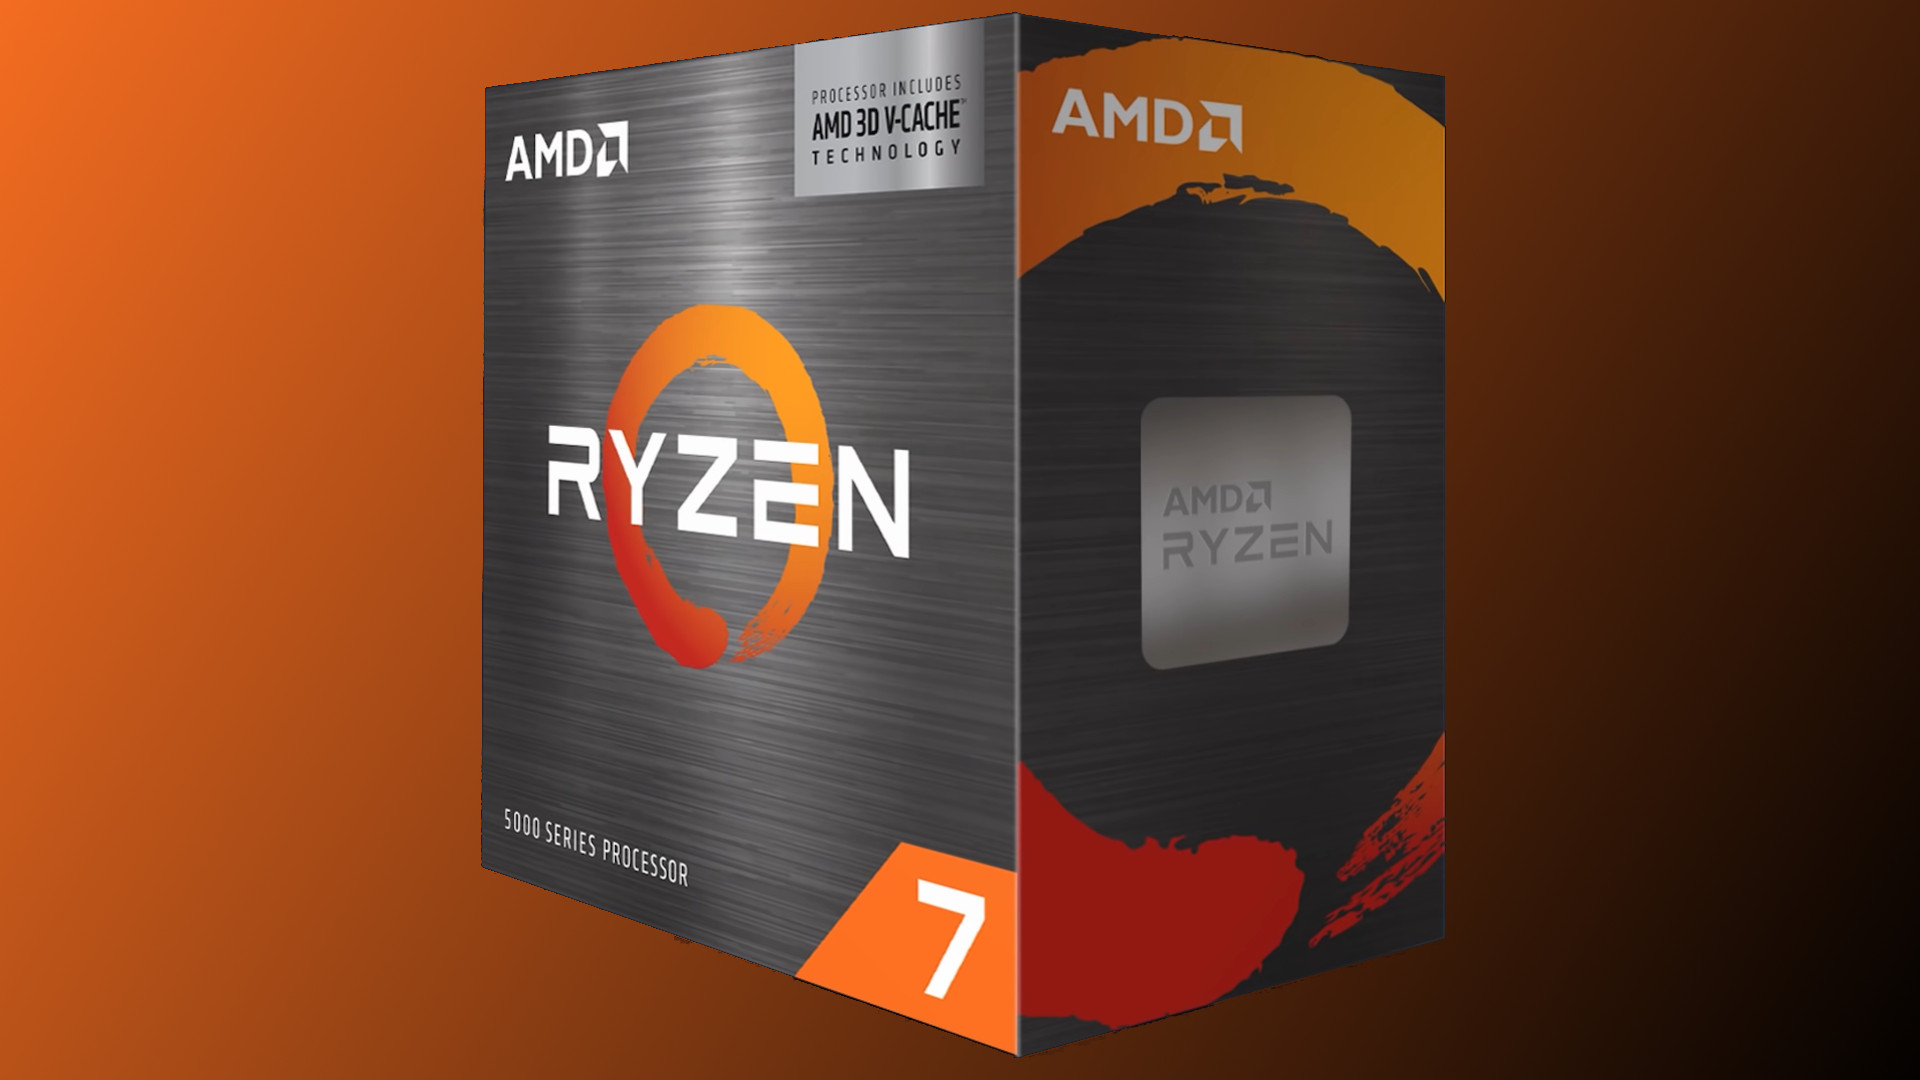 AMD: “the Ryzen 7 5800X3D is the world's fastest gaming CPU”